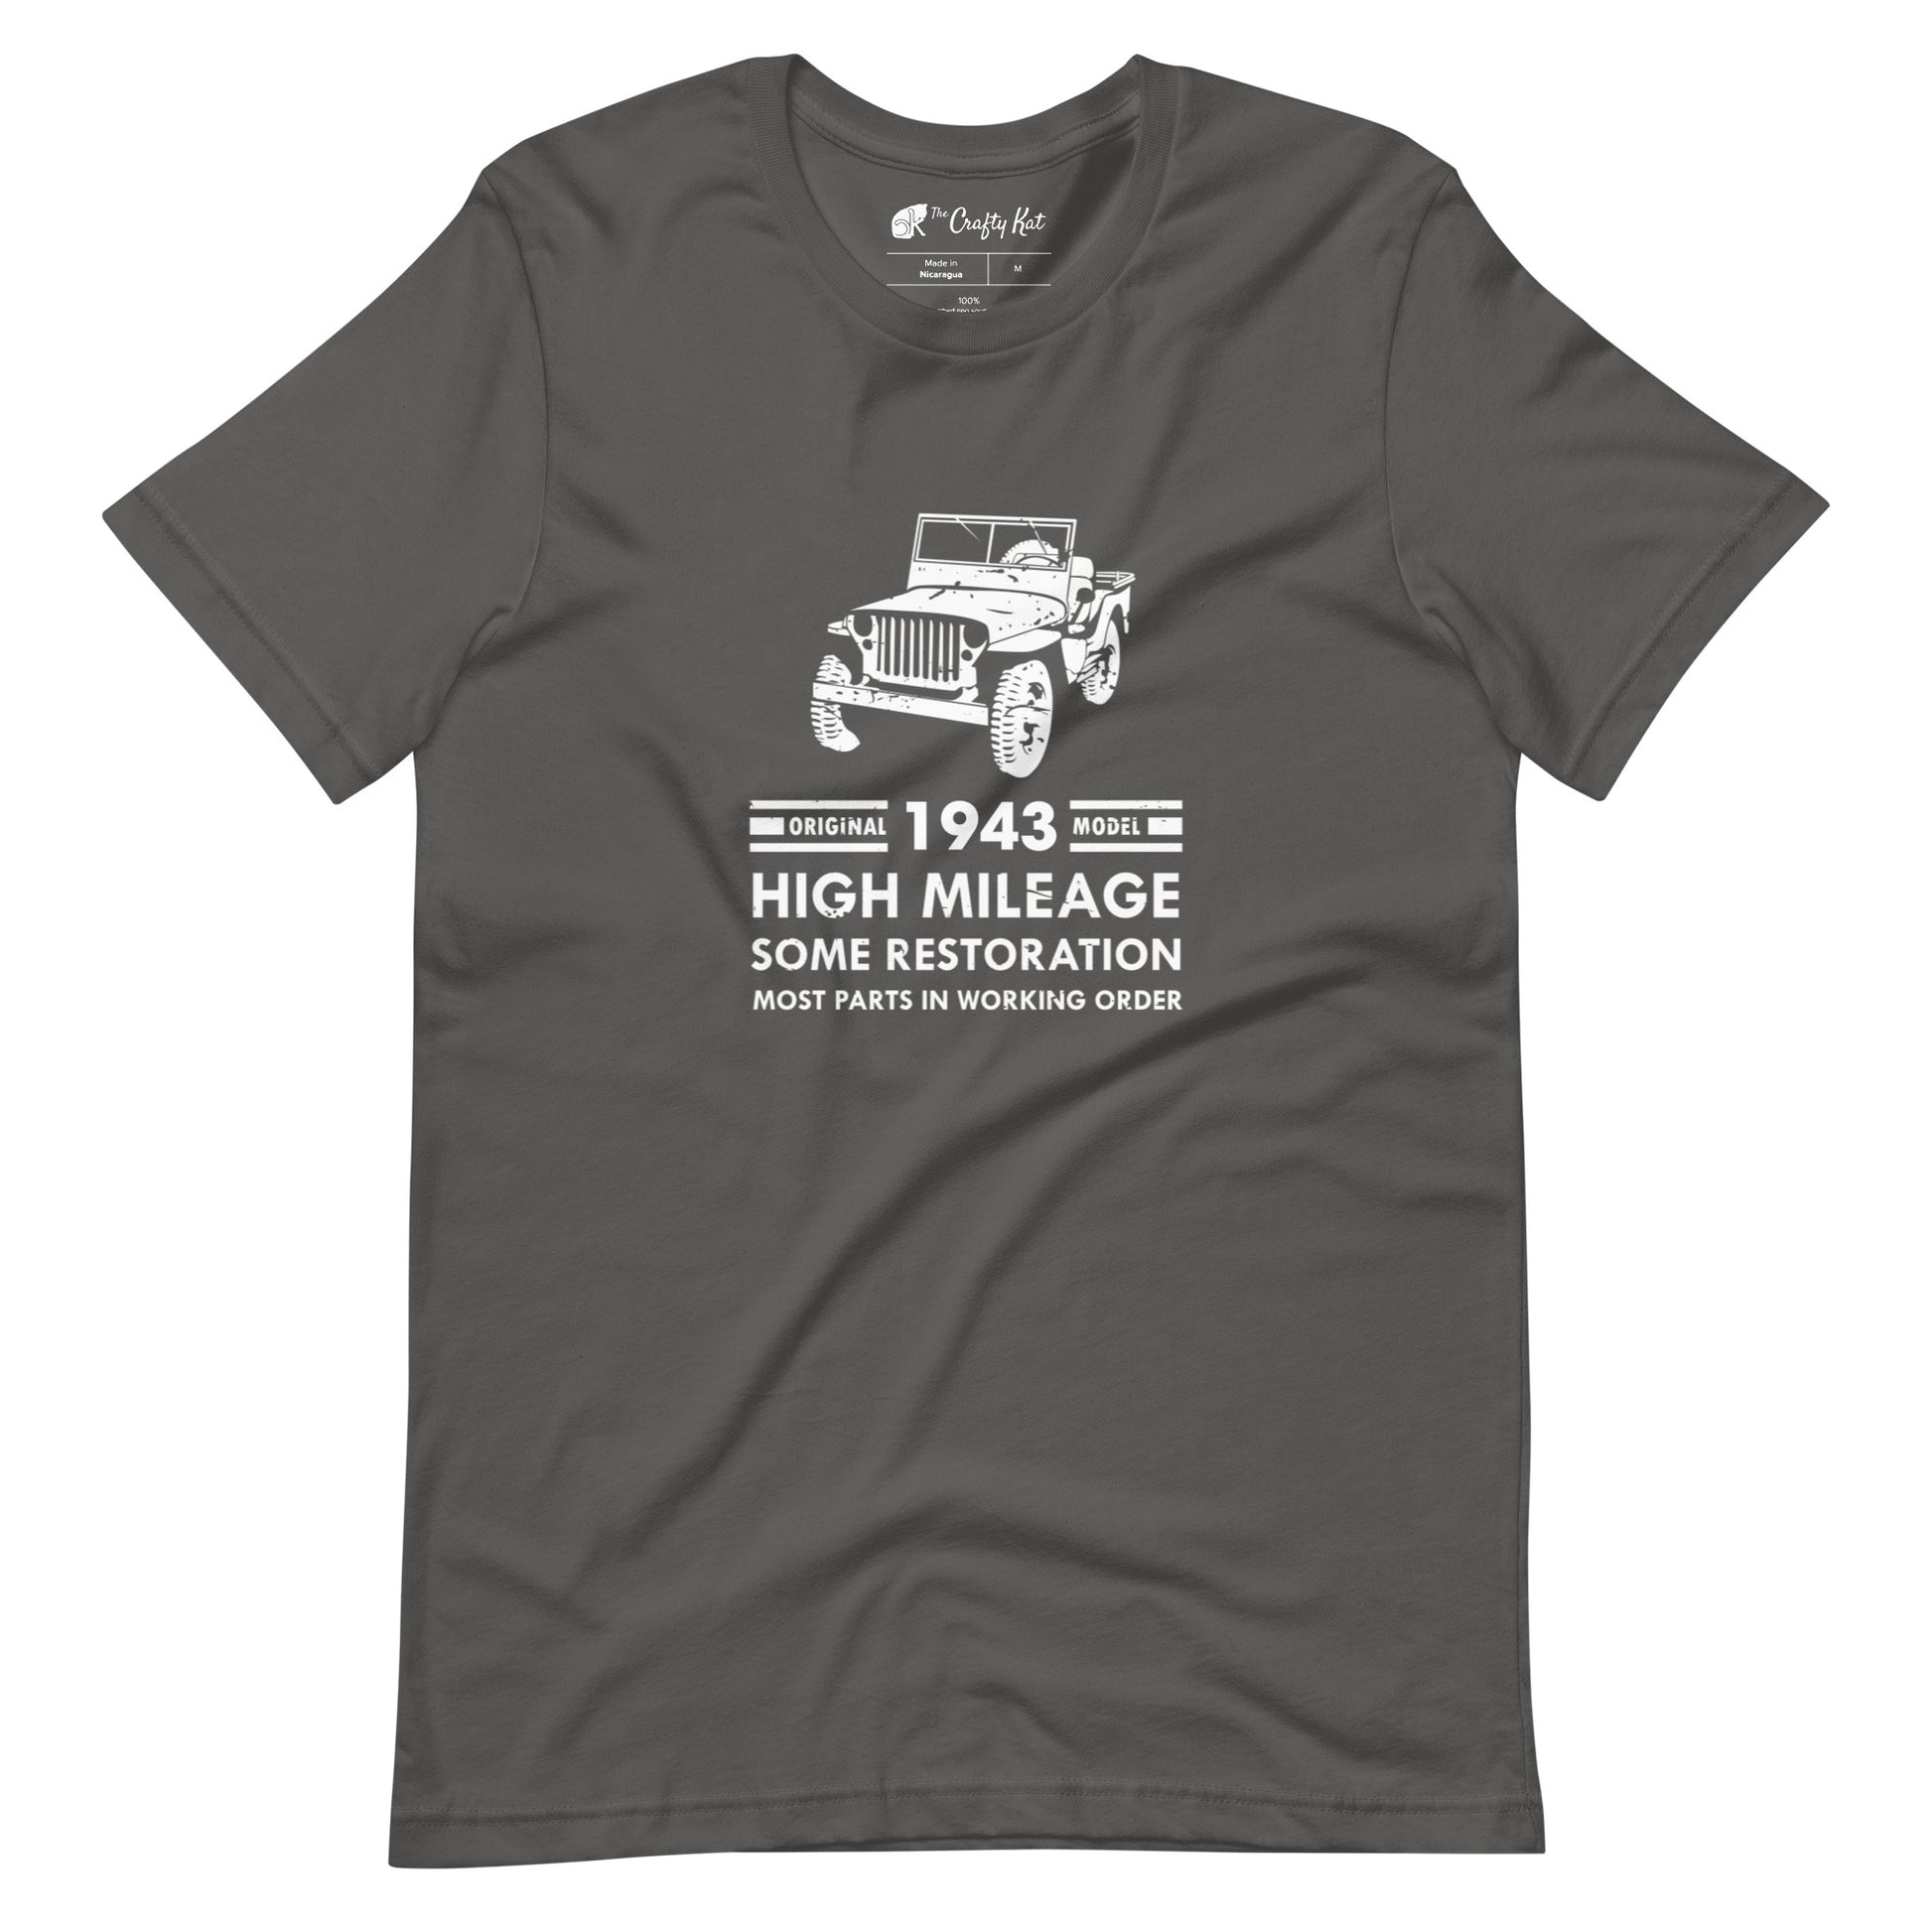 Asphalt grey t-shirt with distressed graphic of old military jeep and text "Original YEAR model HIGH MILEAGE some restoration MOST PARTS IN WORKING ORDER"